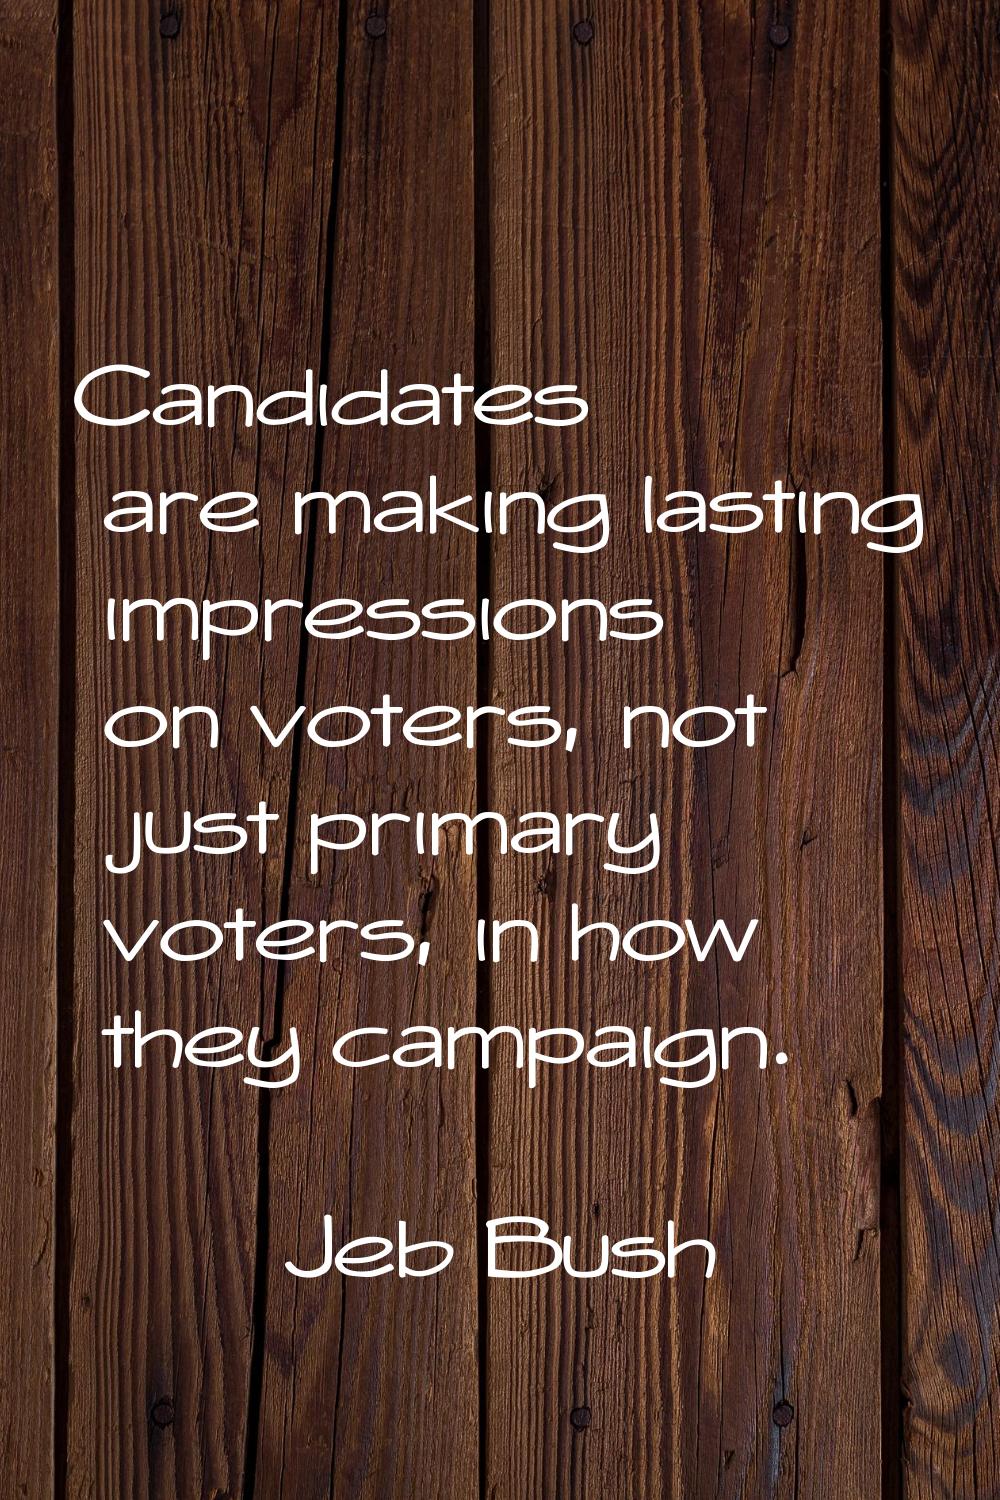 Candidates are making lasting impressions on voters, not just primary voters, in how they campaign.